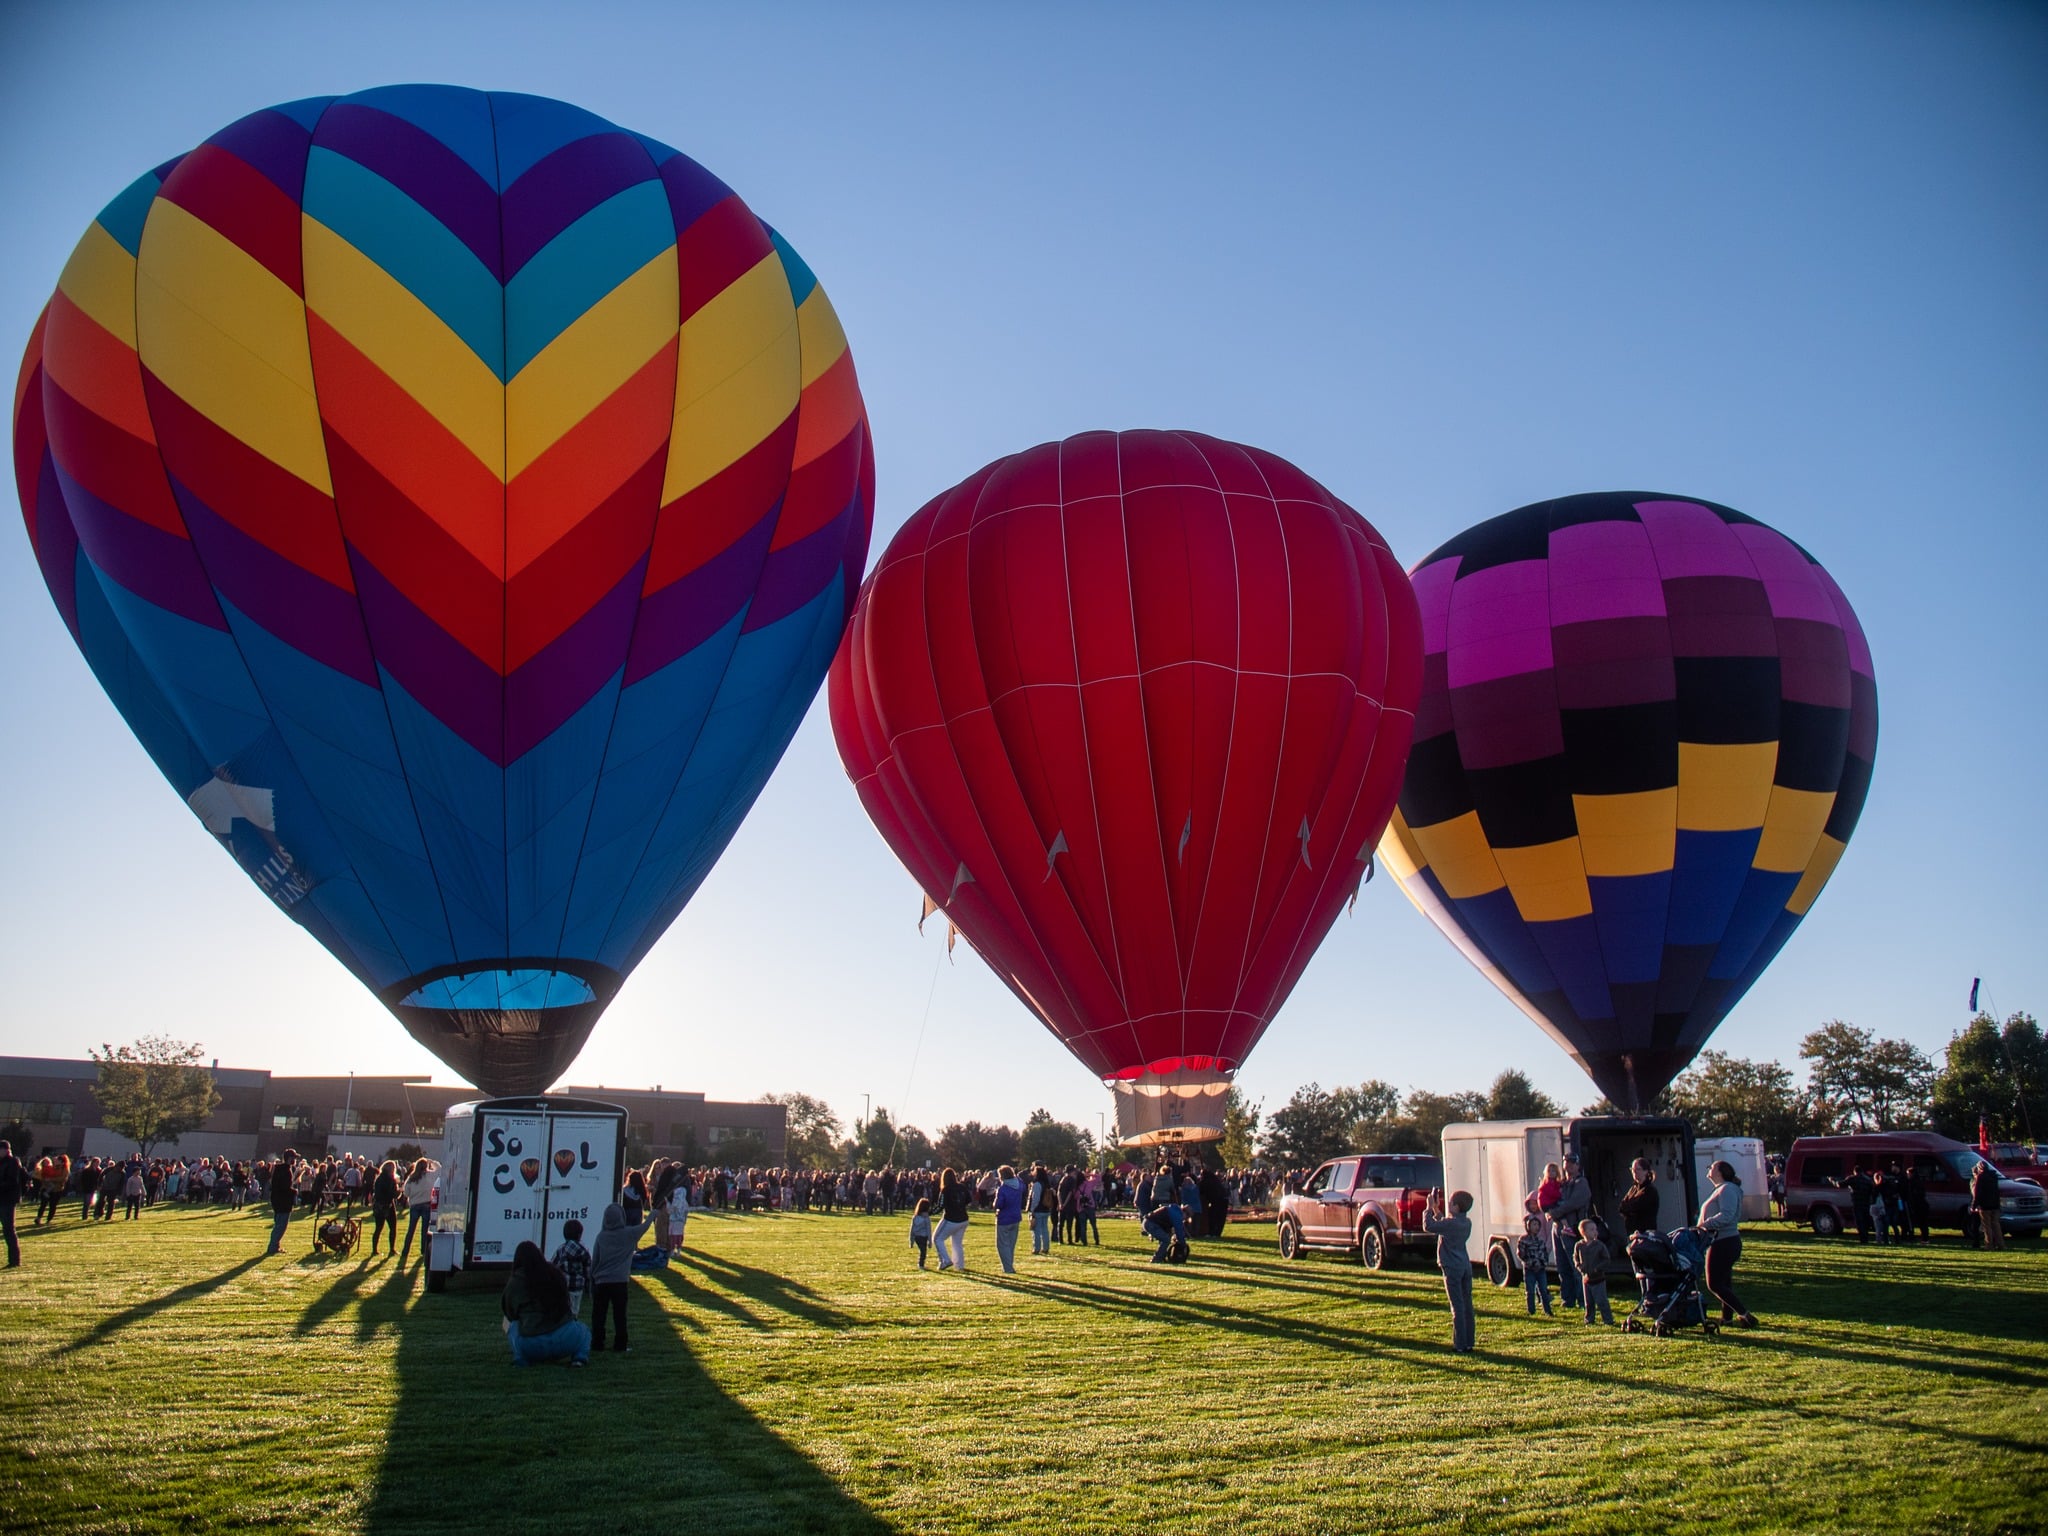 Three brightly colored hot air balloons sit poised for take off on a bright green lawn at Aims Community College in Greeley, Colorado